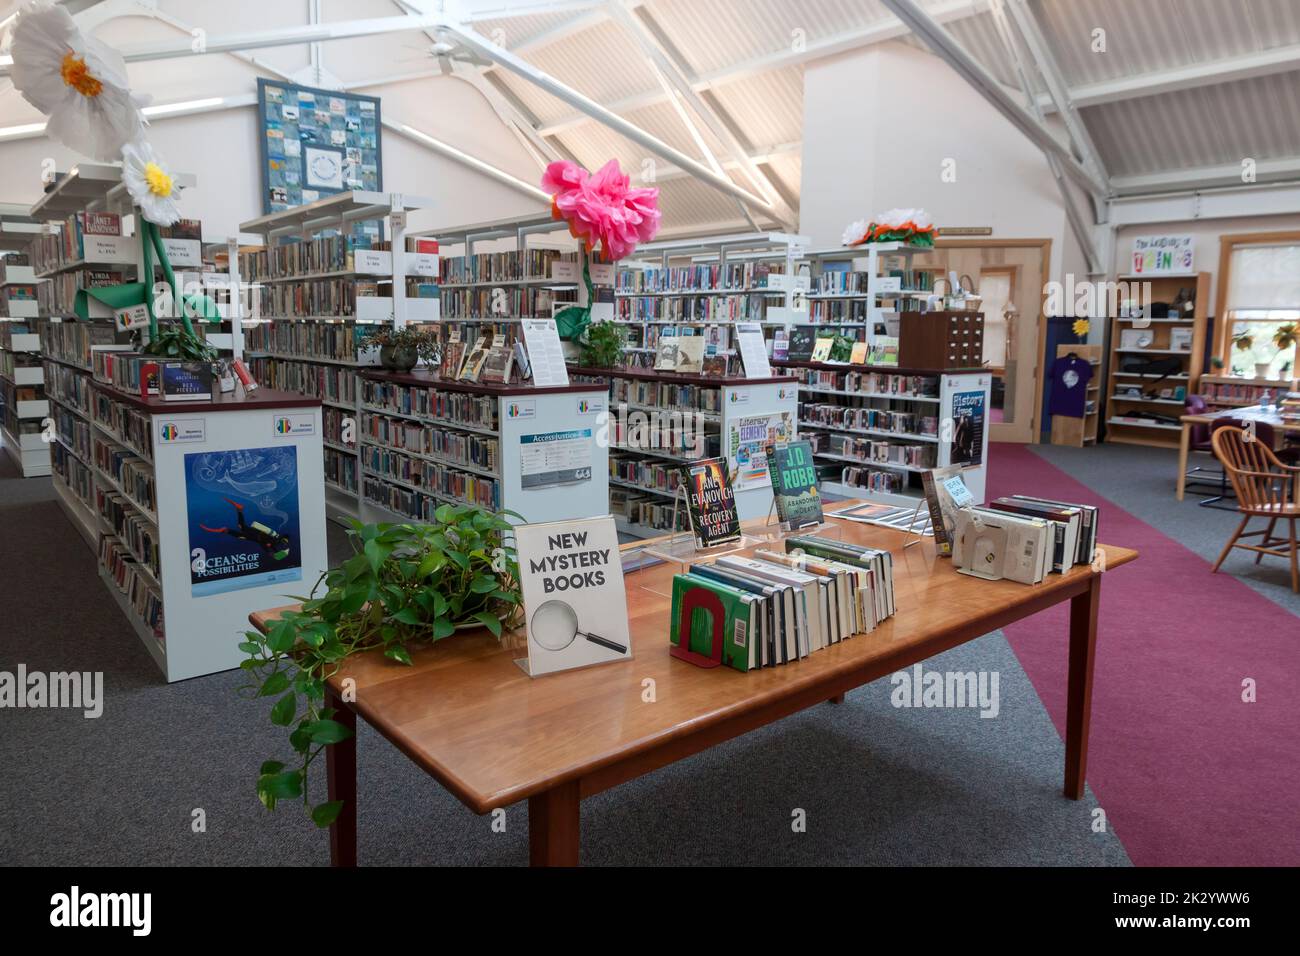 New Mystery Books on Display in the Truro Public Library on Cape Cod in Massachusetts, United States. Stock Photo